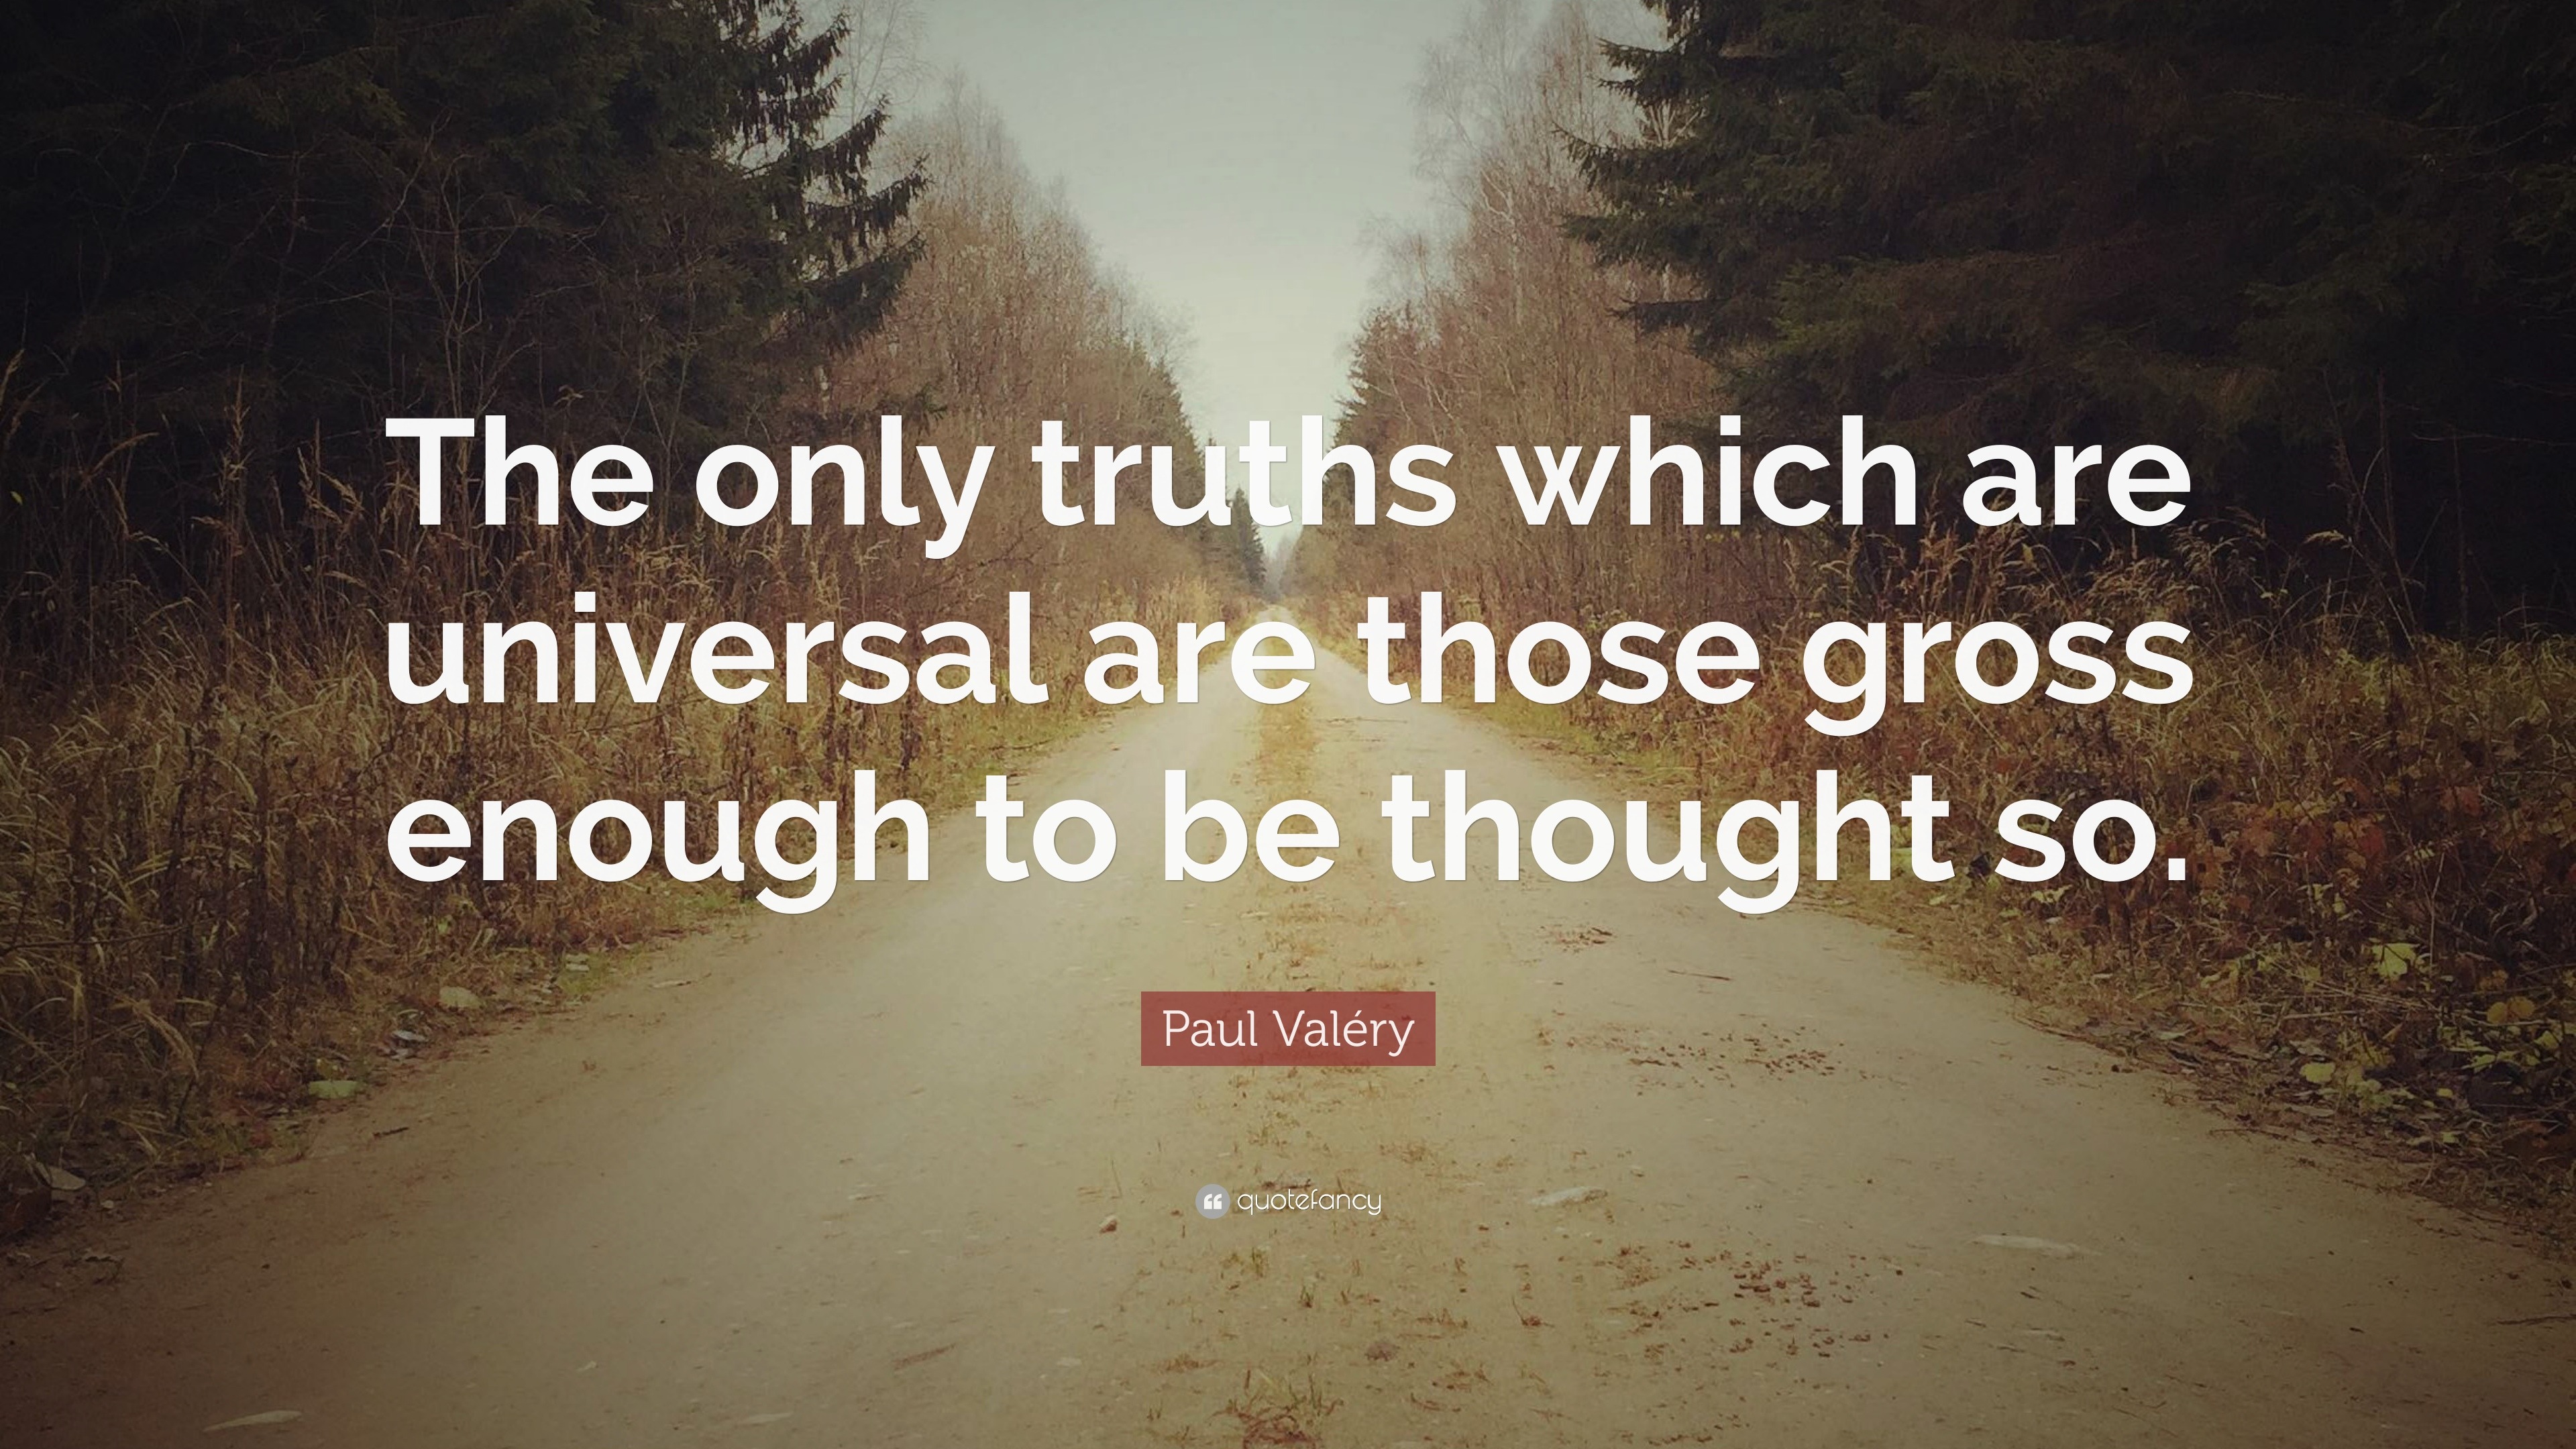 Paul Valéry Quote: “The only truths which are universal are those gross